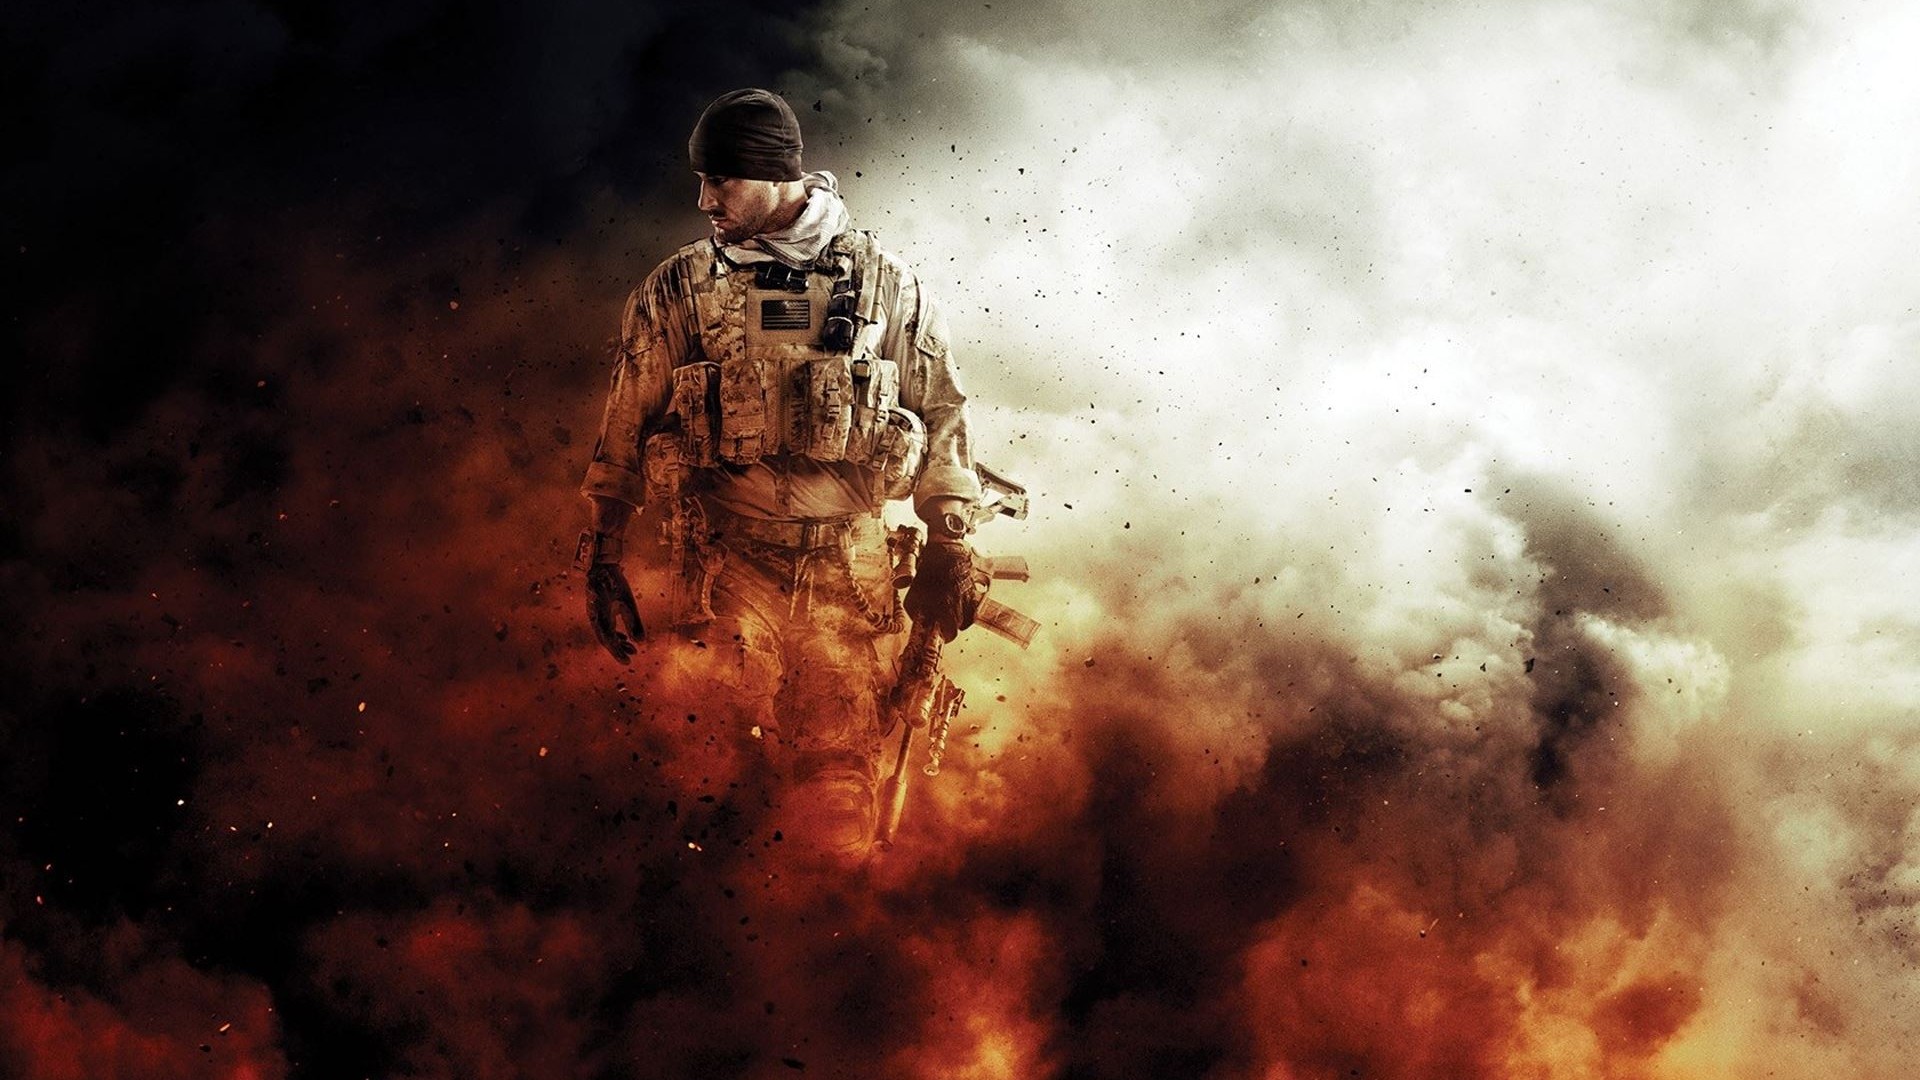 Video Game Medal Of Honor: Warfighter HD Wallpaper | Background Image